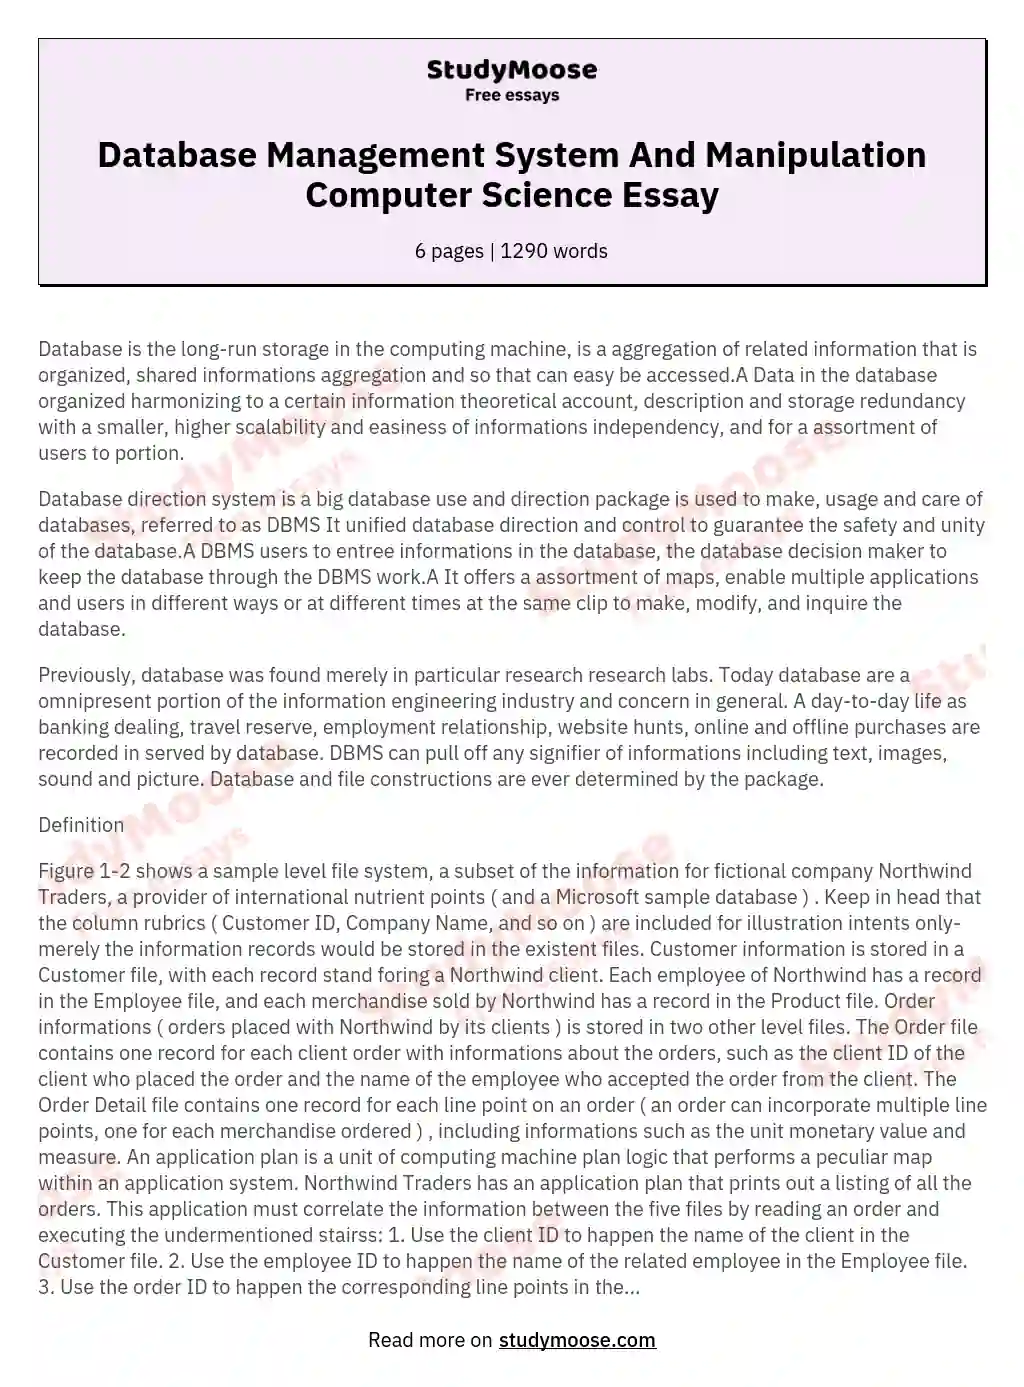 Database Management System And Manipulation Computer Science Essay